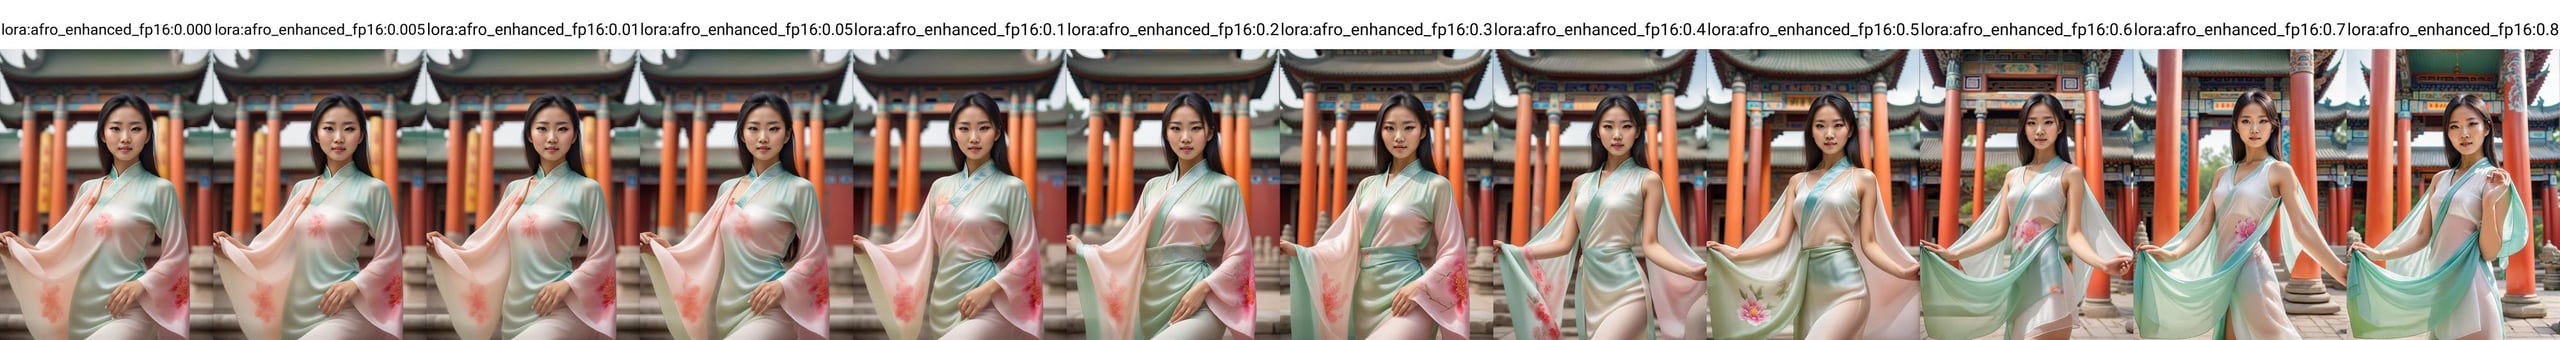 A Photograph of a young chinese woman in a realistic professional photoshoot, silk cloths, Capture her graceful beauty as she poses amidst a vibrant temple backdrop,  <lora:afro_enhanced_fp16:0.000>